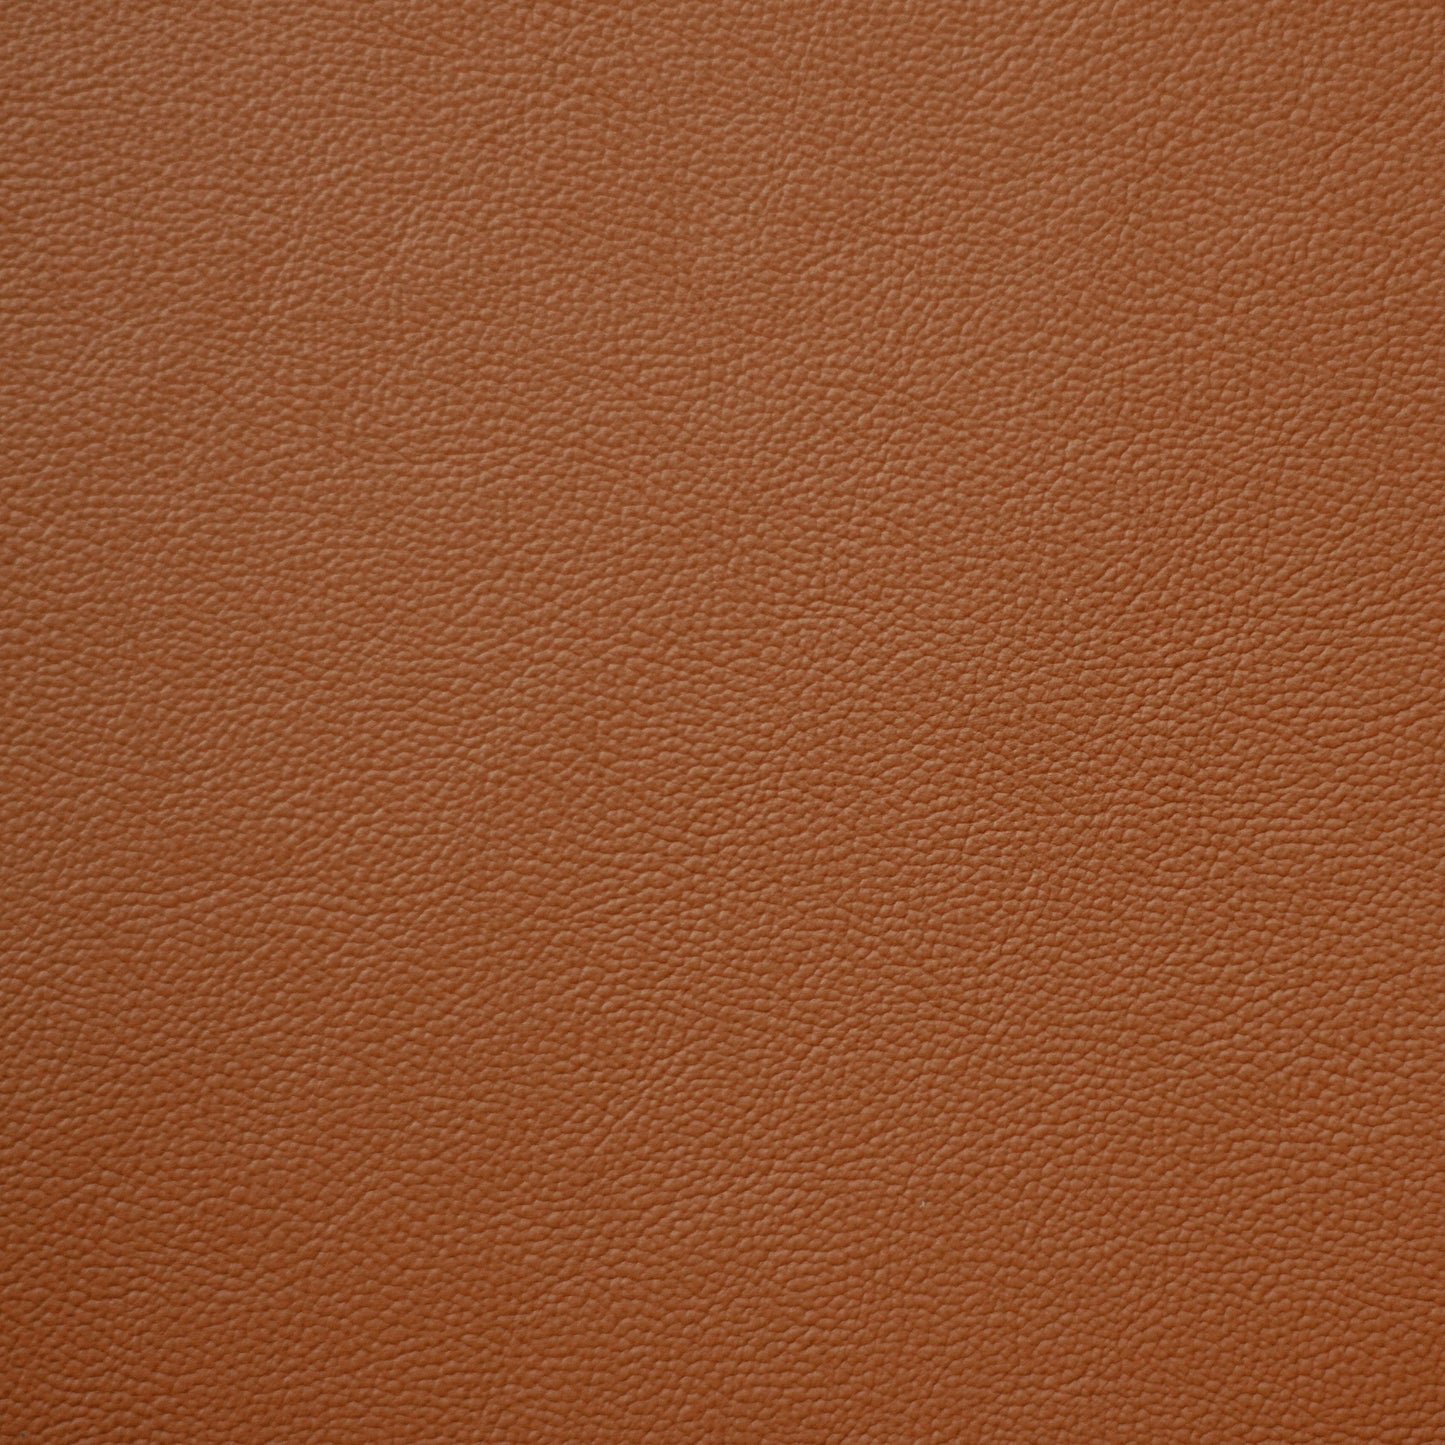 Empire, Chariot, Iconic® Antimicrobial & Cleanable, Hospitality Leather Hide